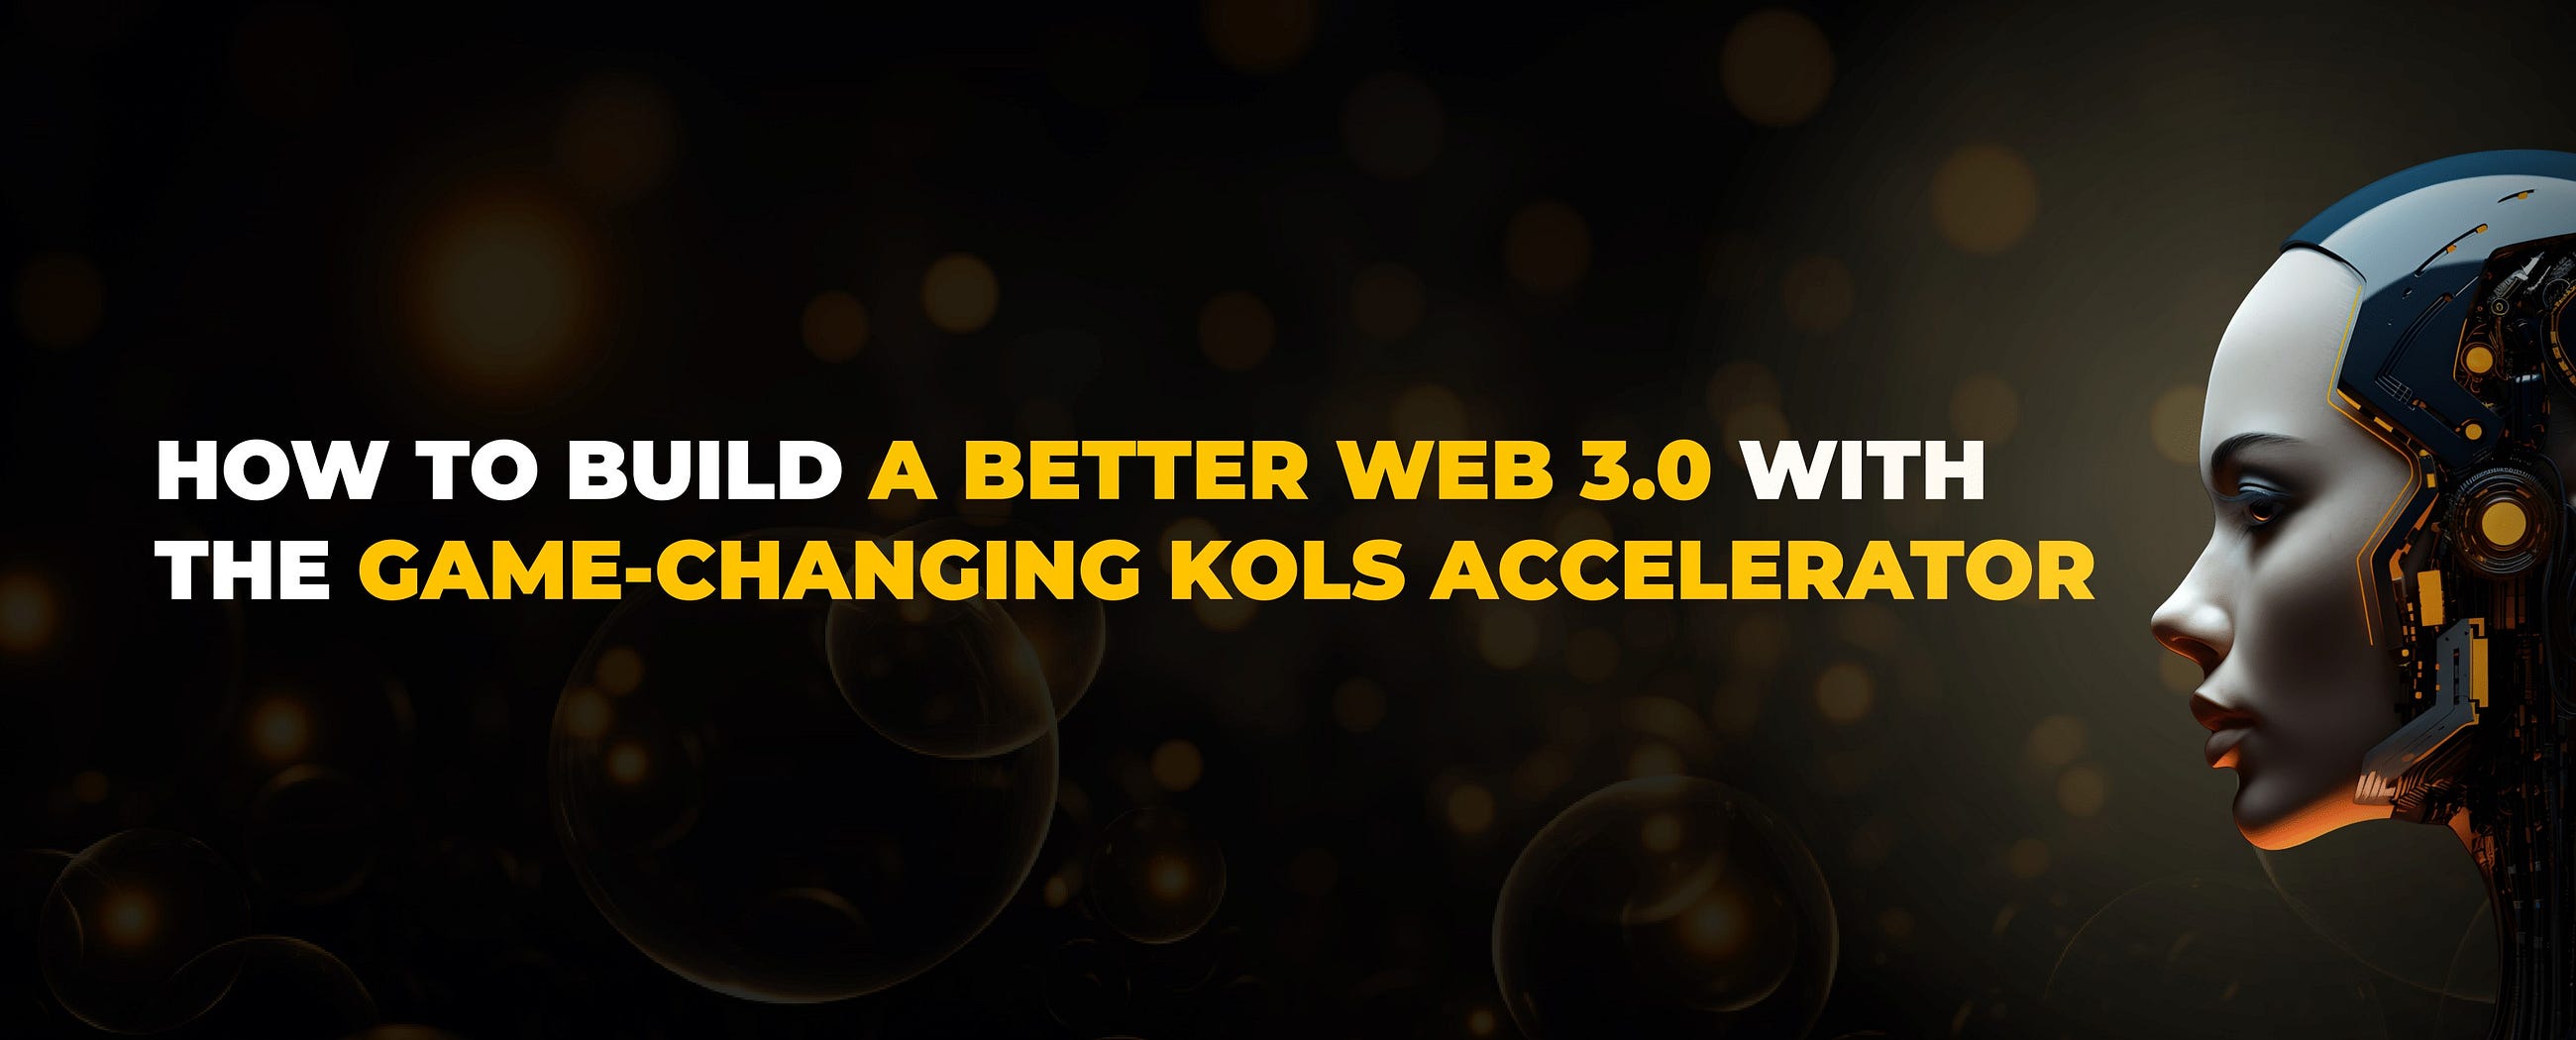 How to Build a Better Web 3.0 with the Game-Changing KOLs Accelerator